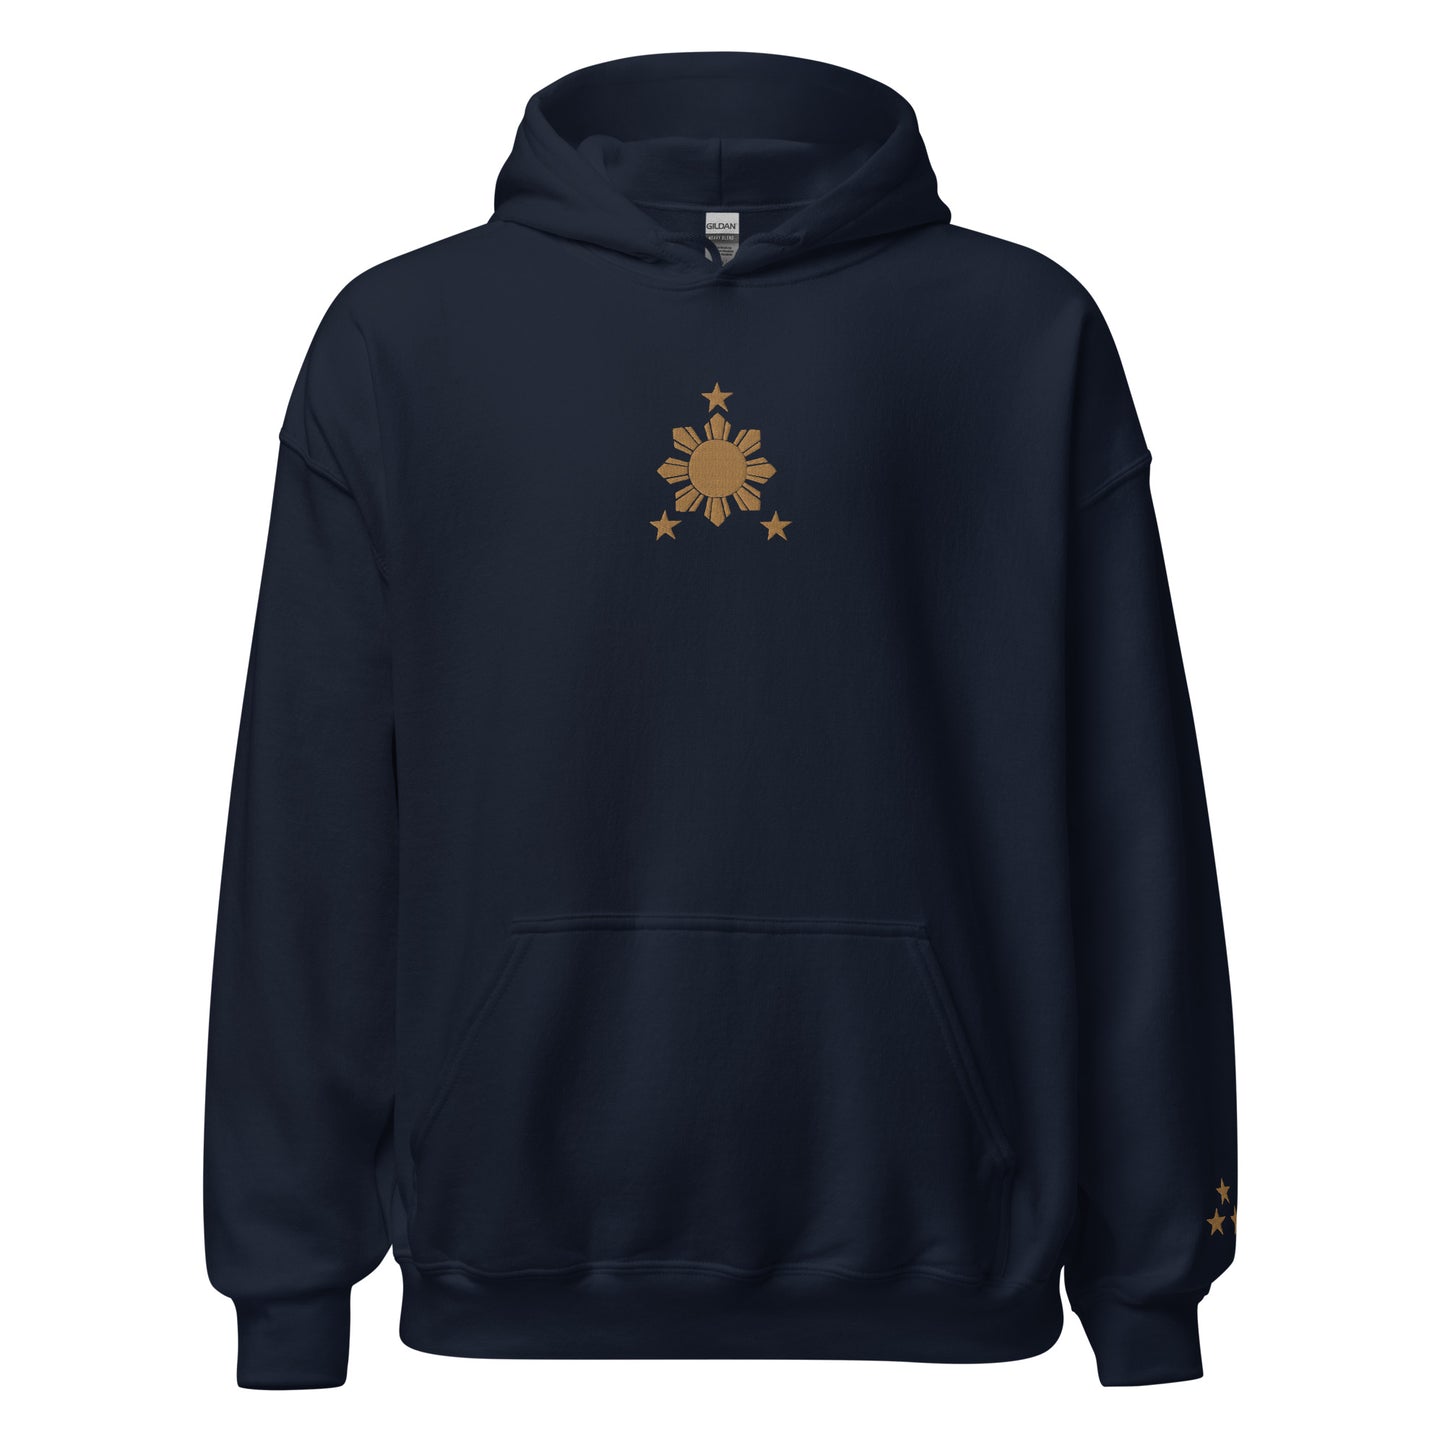 Filipino Hoodie Stars and Sun Embroidered Merch in color variant Navy